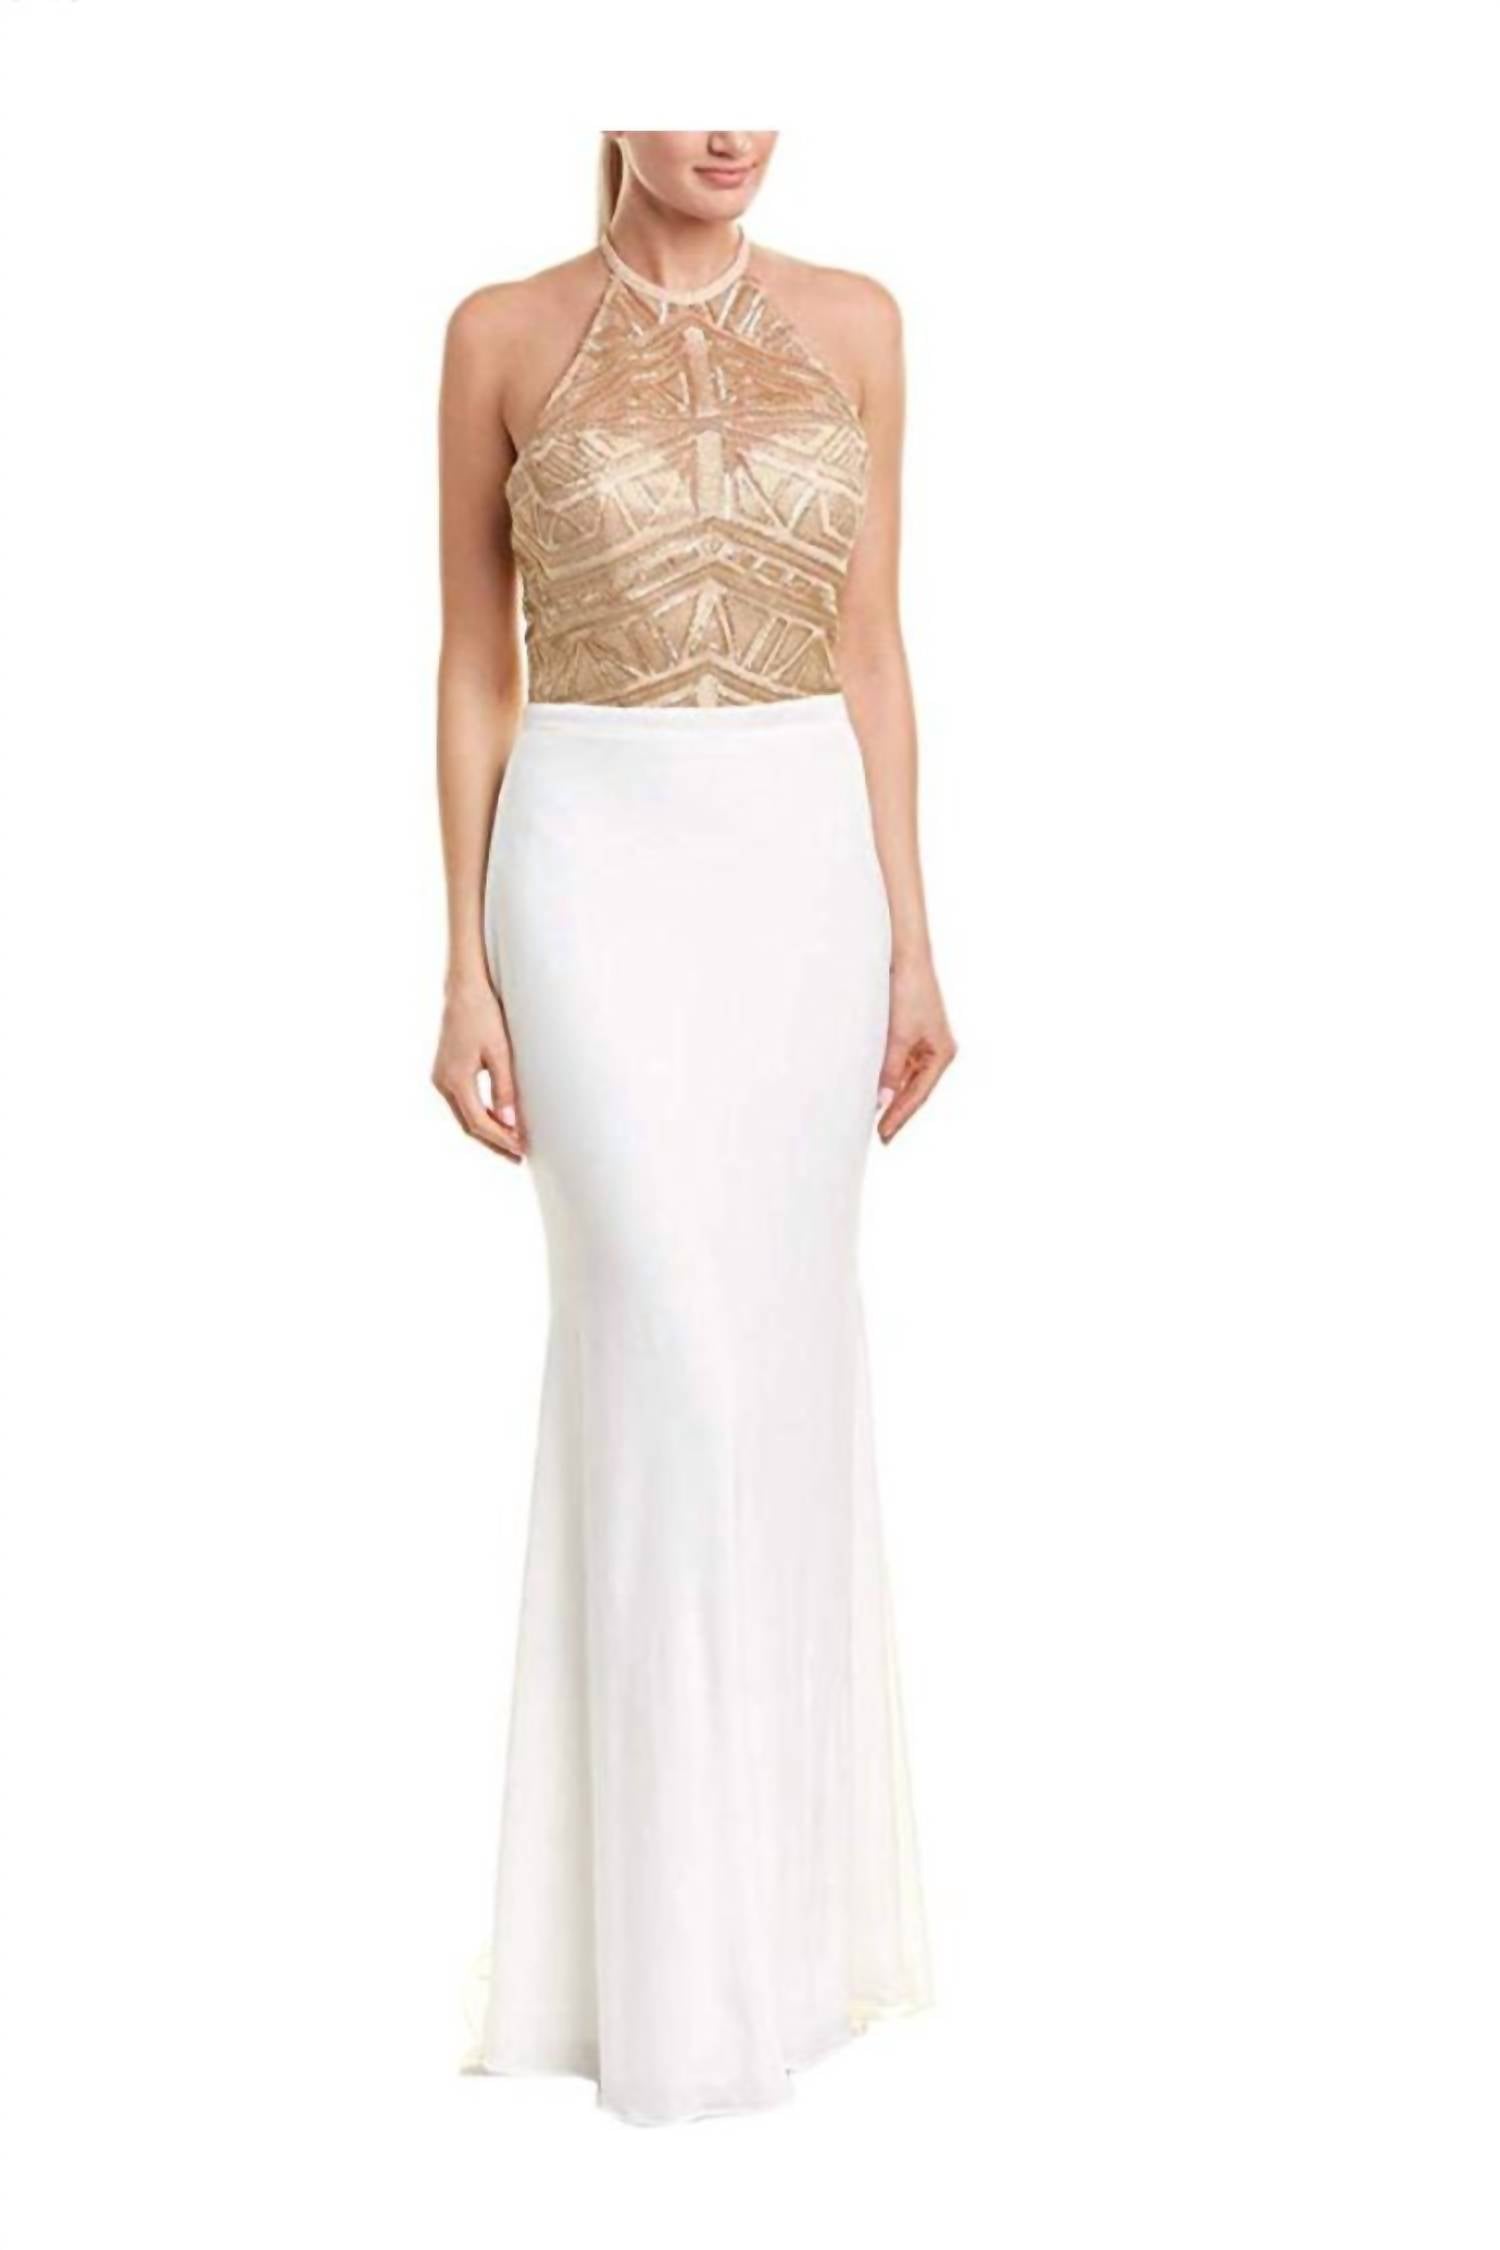 Shop Issue New York Ivory And Gold Evening Gown